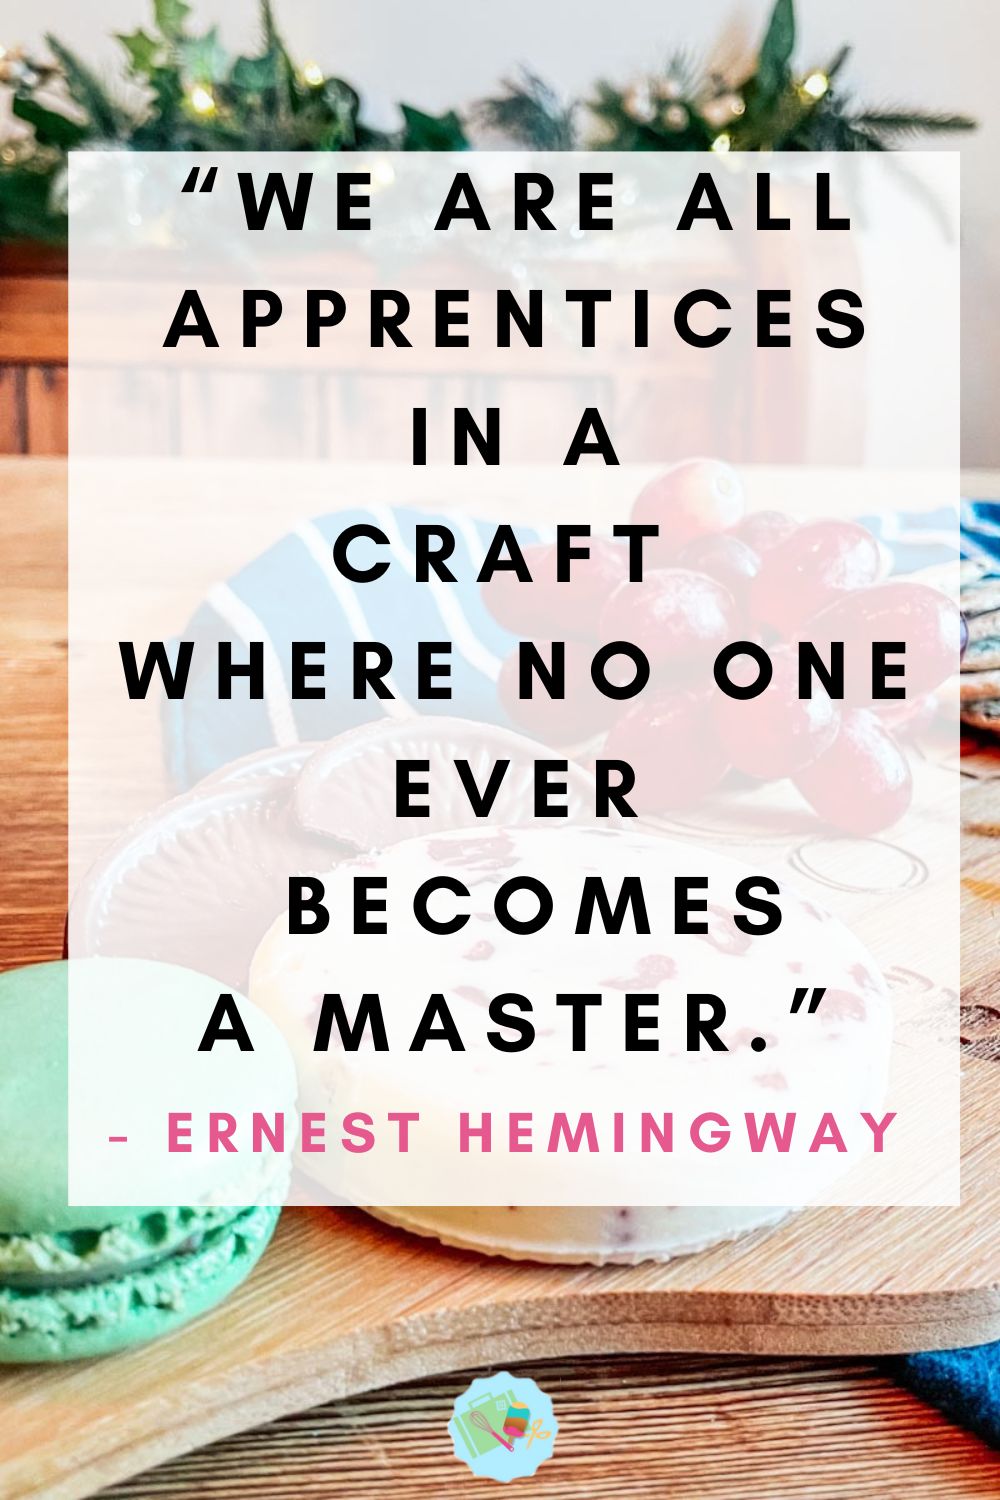 “We are all apprentices in a craft where no one ever becomes a master.” ~ Ernest Hemingway